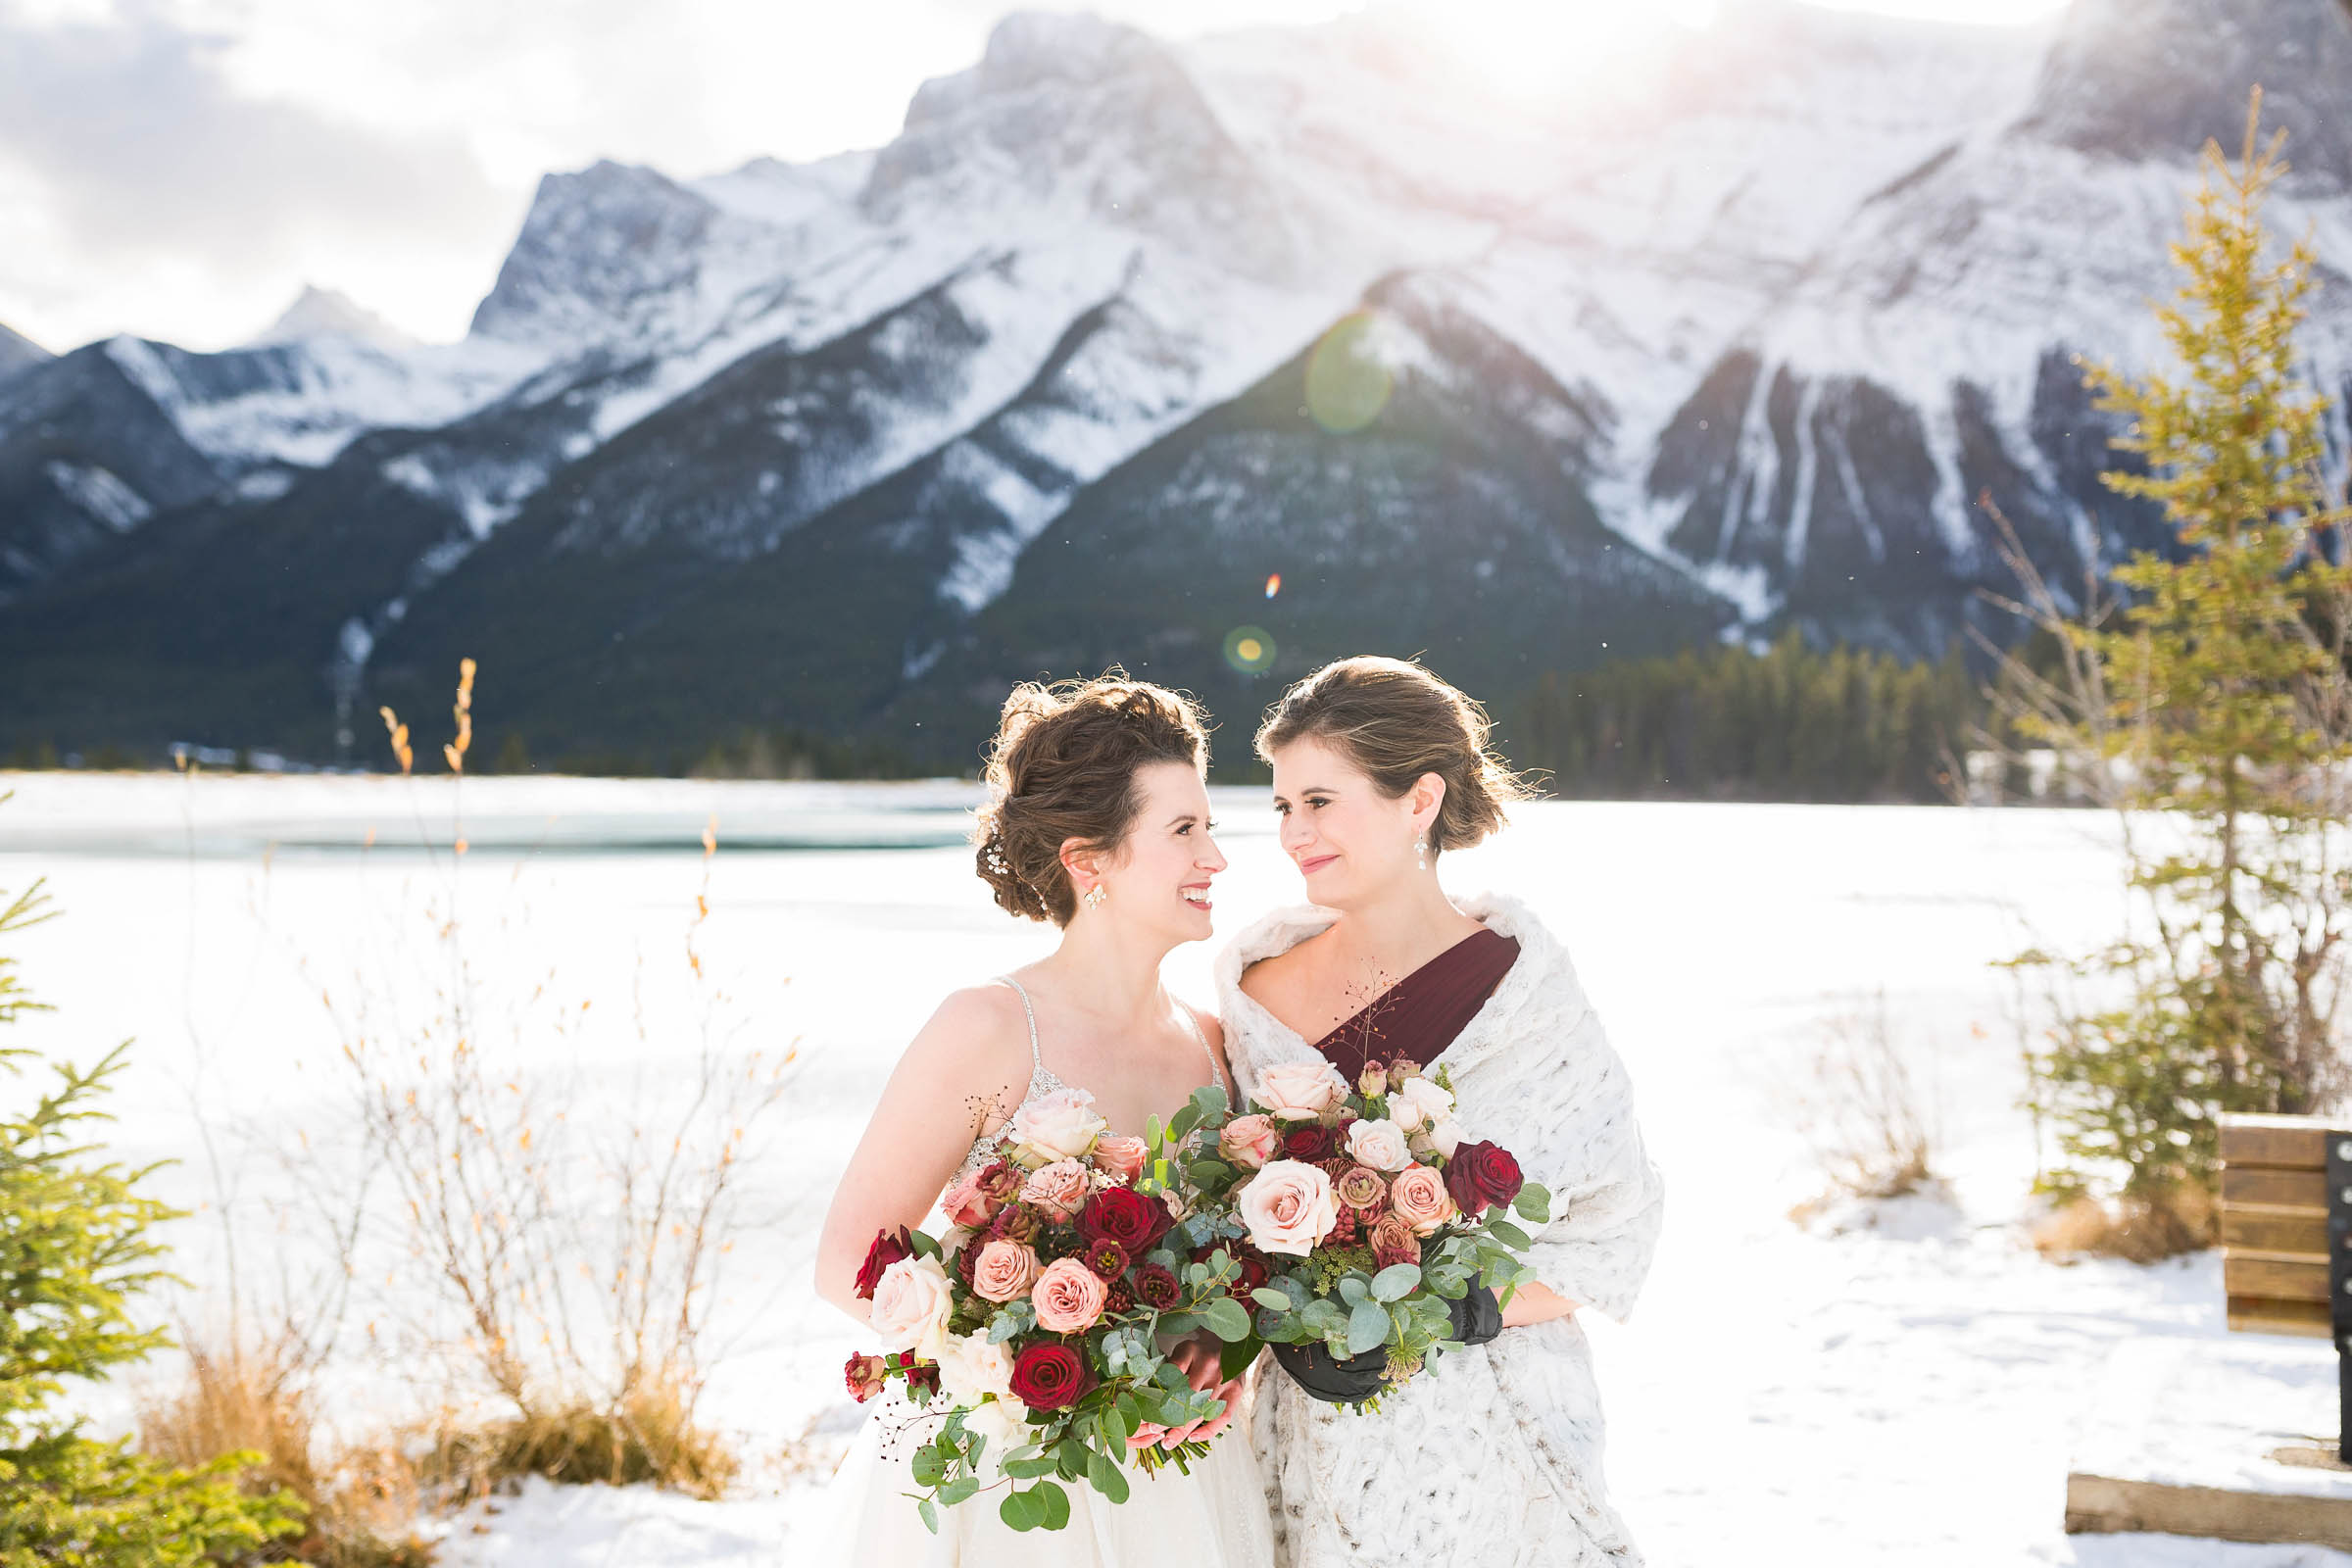 Classic bride and maid of honour smile at each other holding wedding bouquets of red, blush and white roses